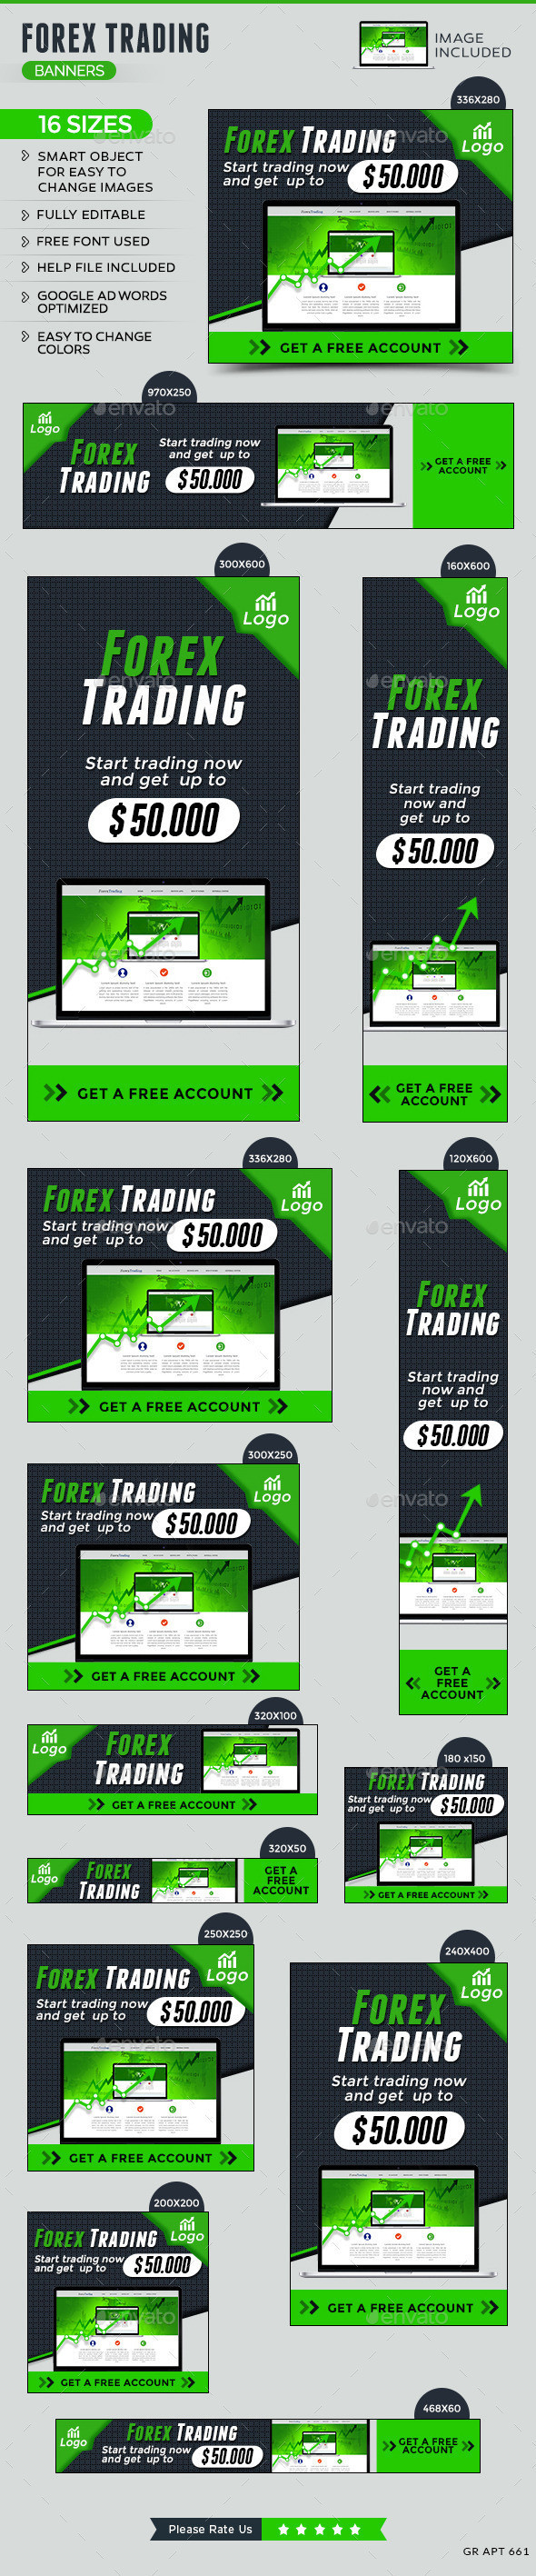 Apt 661 forex 20trading 20banners preview